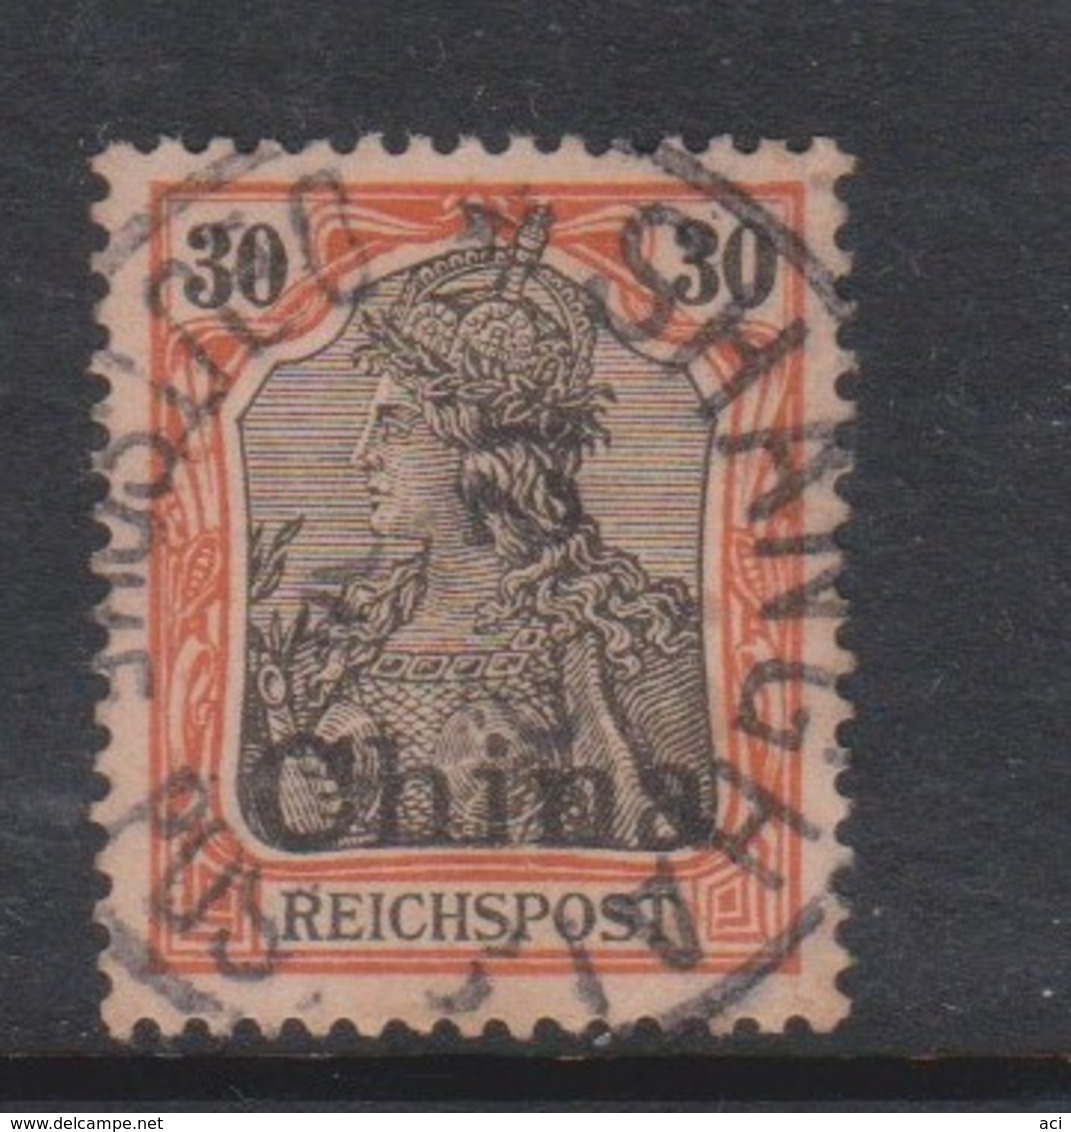 Germany-offices In China 1901 Regular Issue 50pf Orange And Black,used, - China (offices)